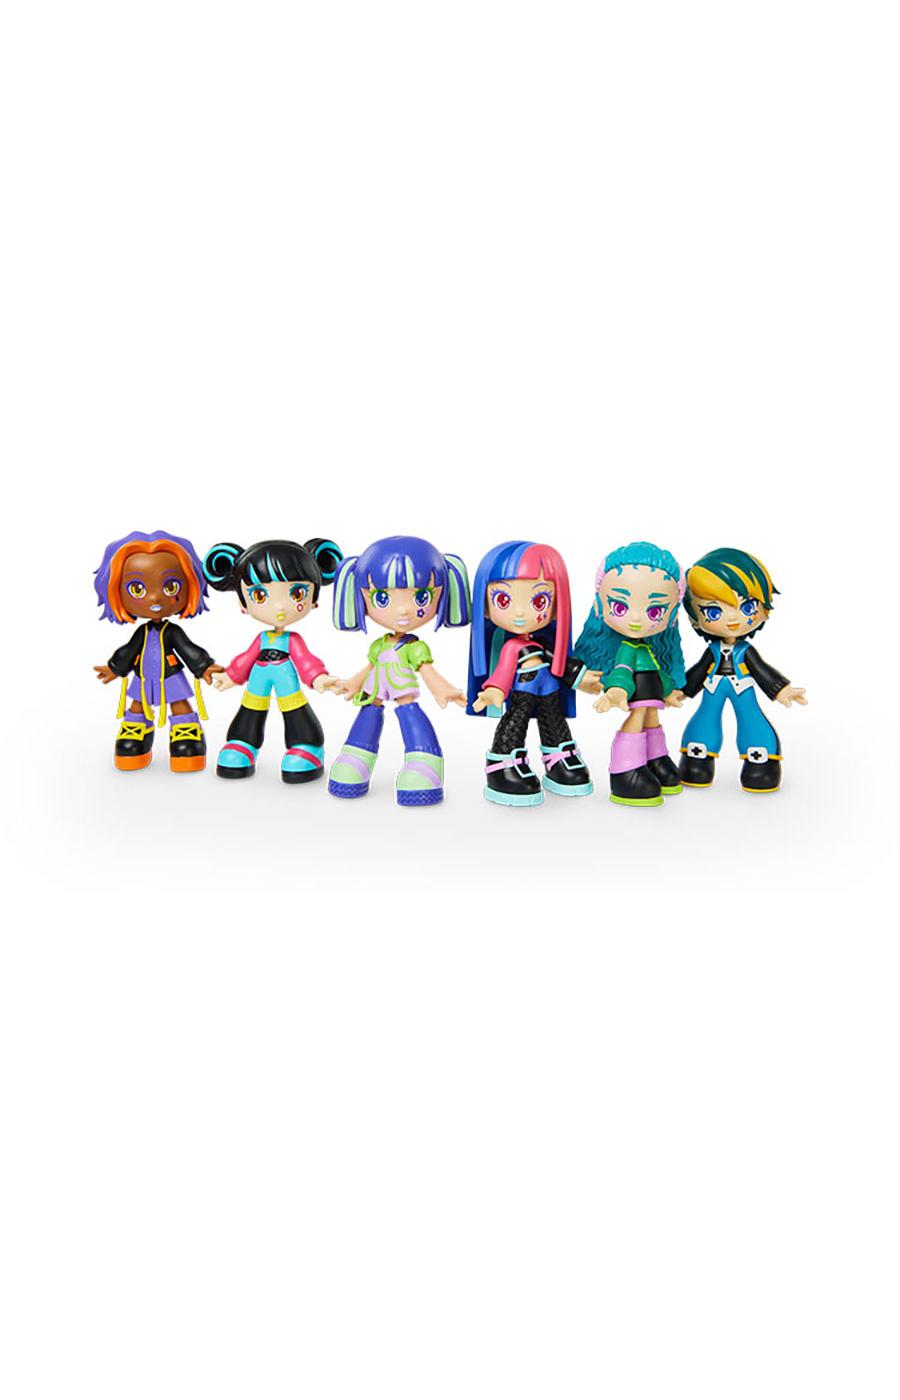 Squadz Place Tokyo Trends Collectible Doll; image 11 of 11